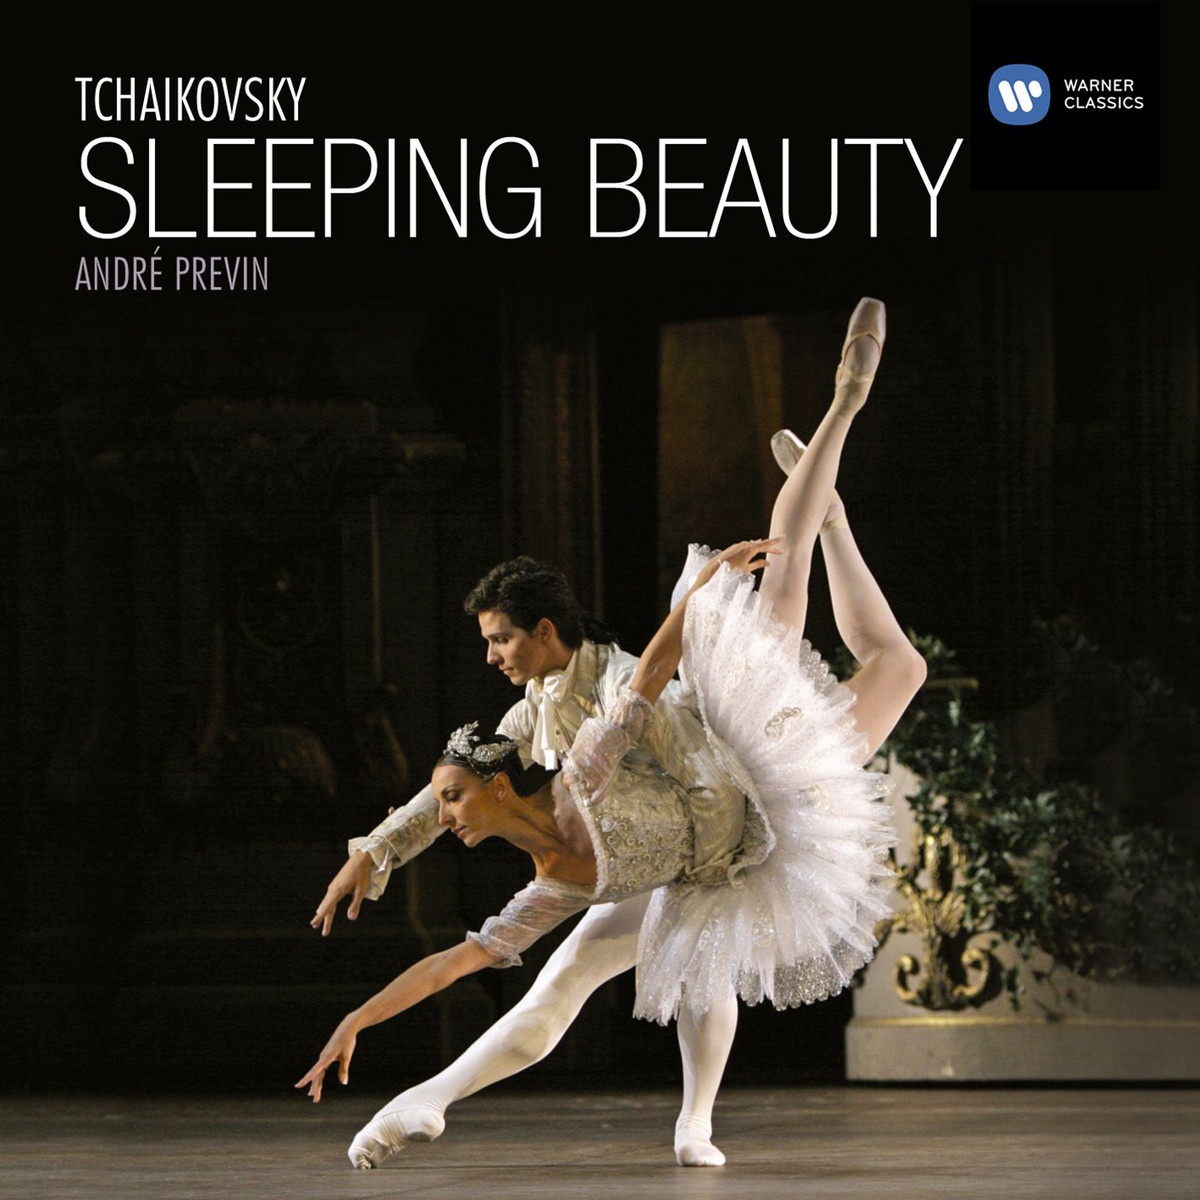 Sleeping Beauty - Ballet Op. 66 (1993 Digital Remaster), ACT III:  "The Wedding": 22.  Polacca (Procession of Fairy-Tale Characters) (Allegro moderato e brillante)